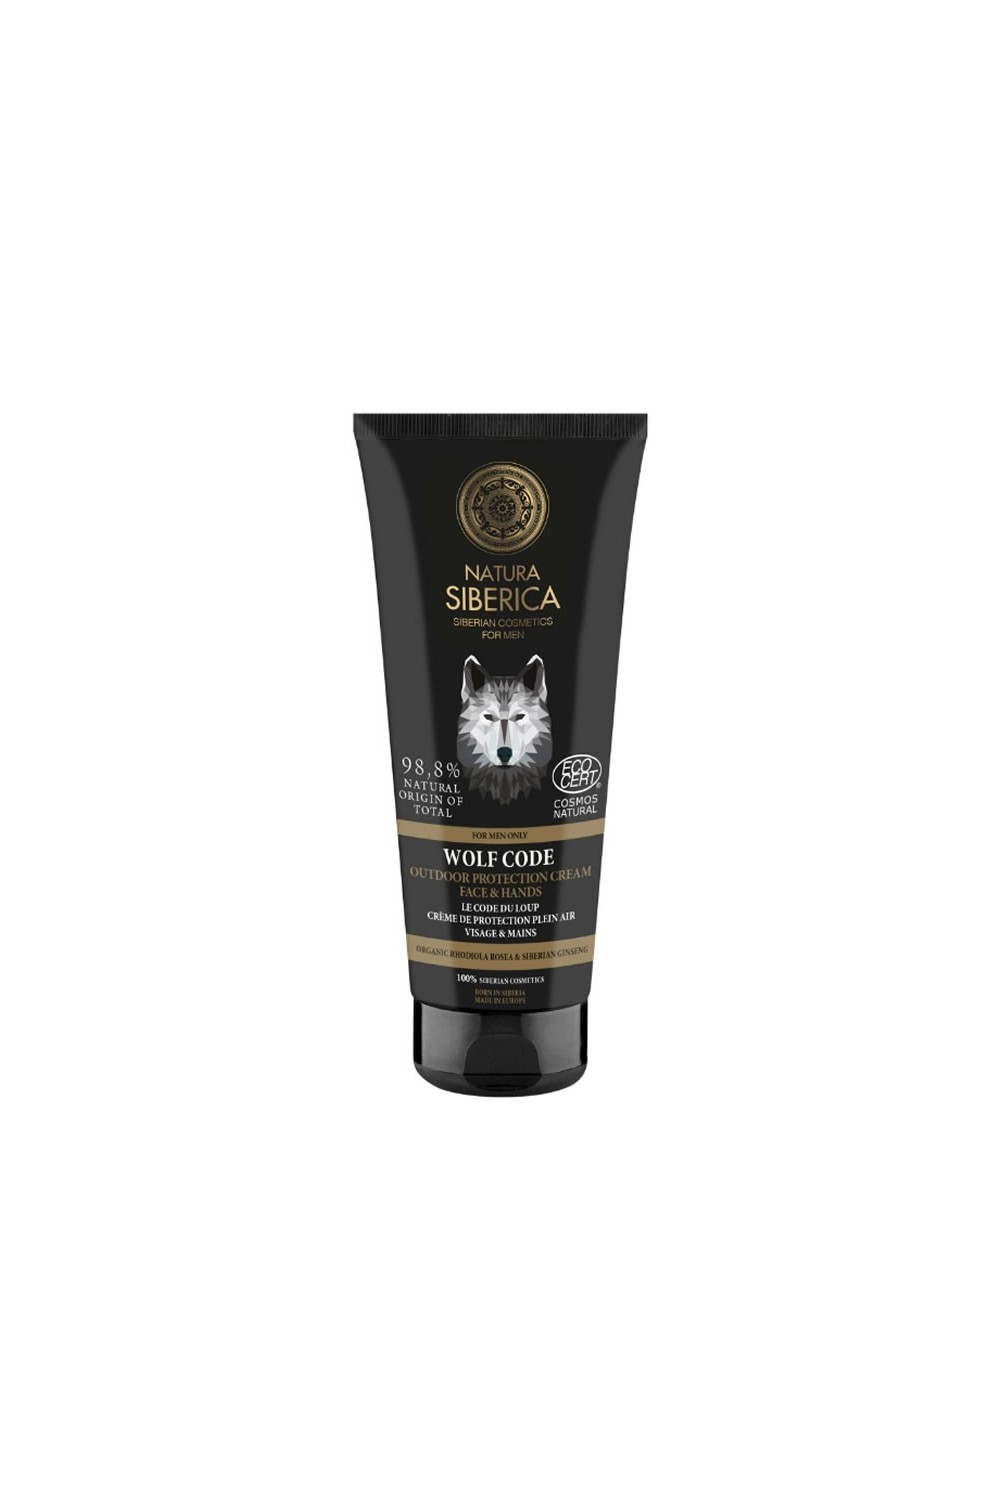 Natura Siberica Wolf Code Outdoor Protection Cream Face And Hands 80ml